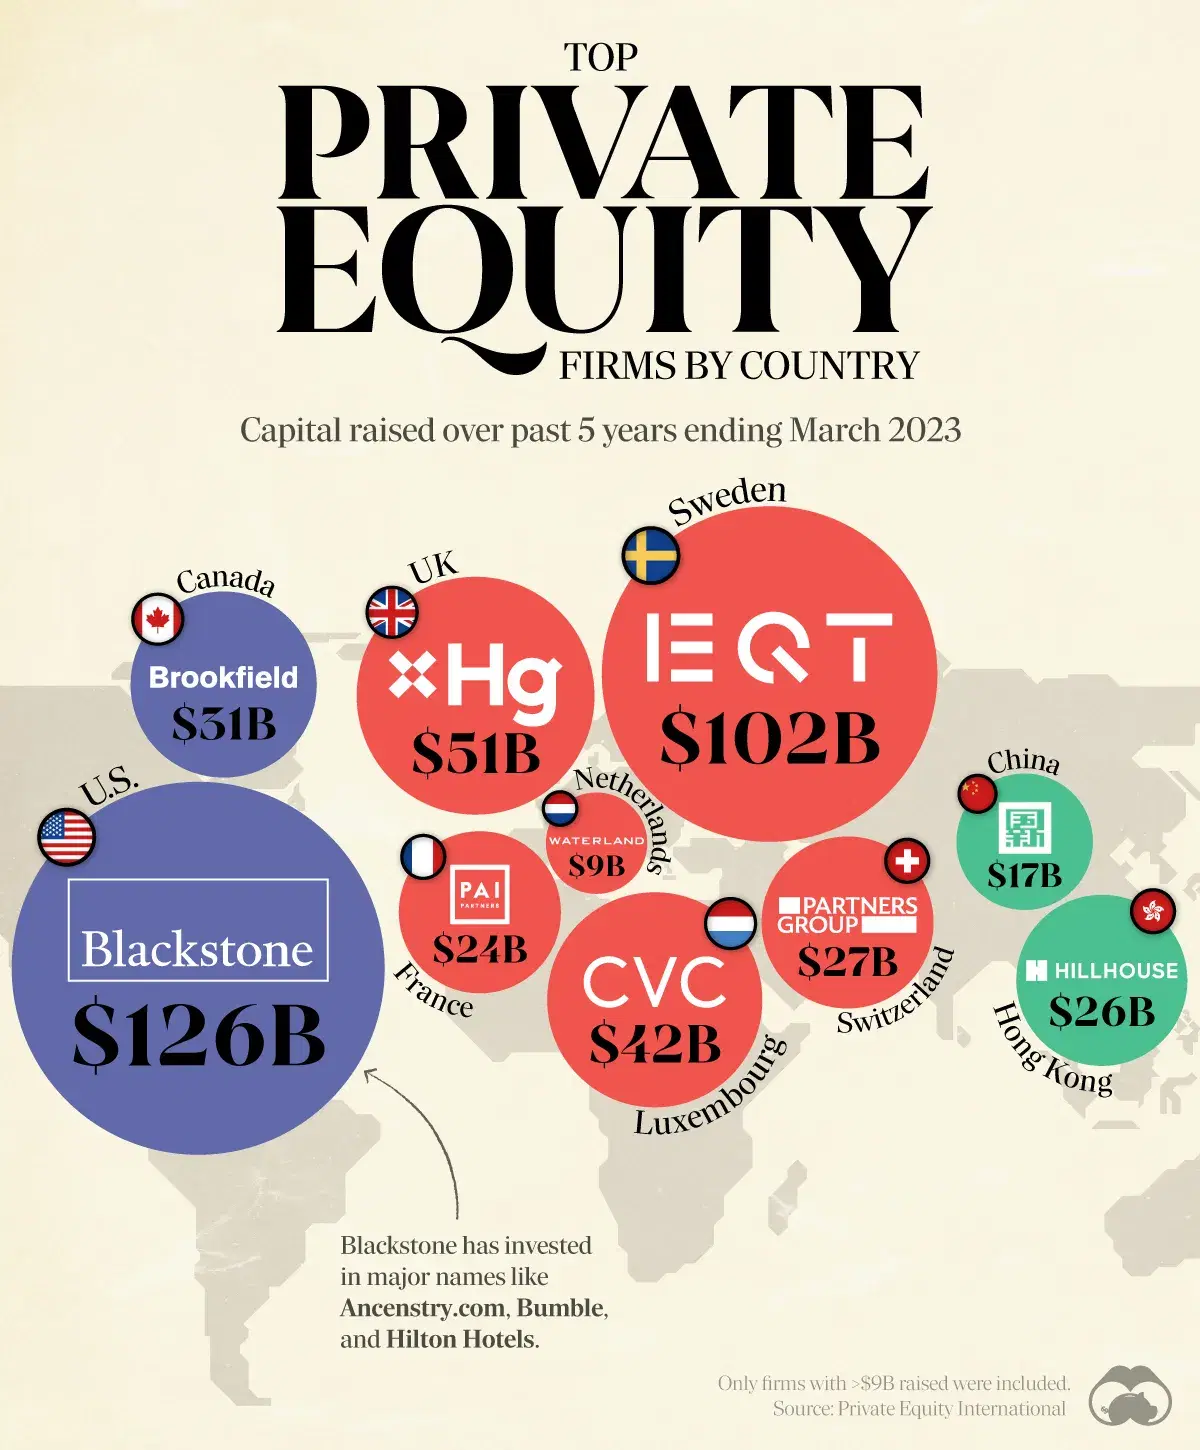 The Leading Private Equity Firms of Various Countries 💼